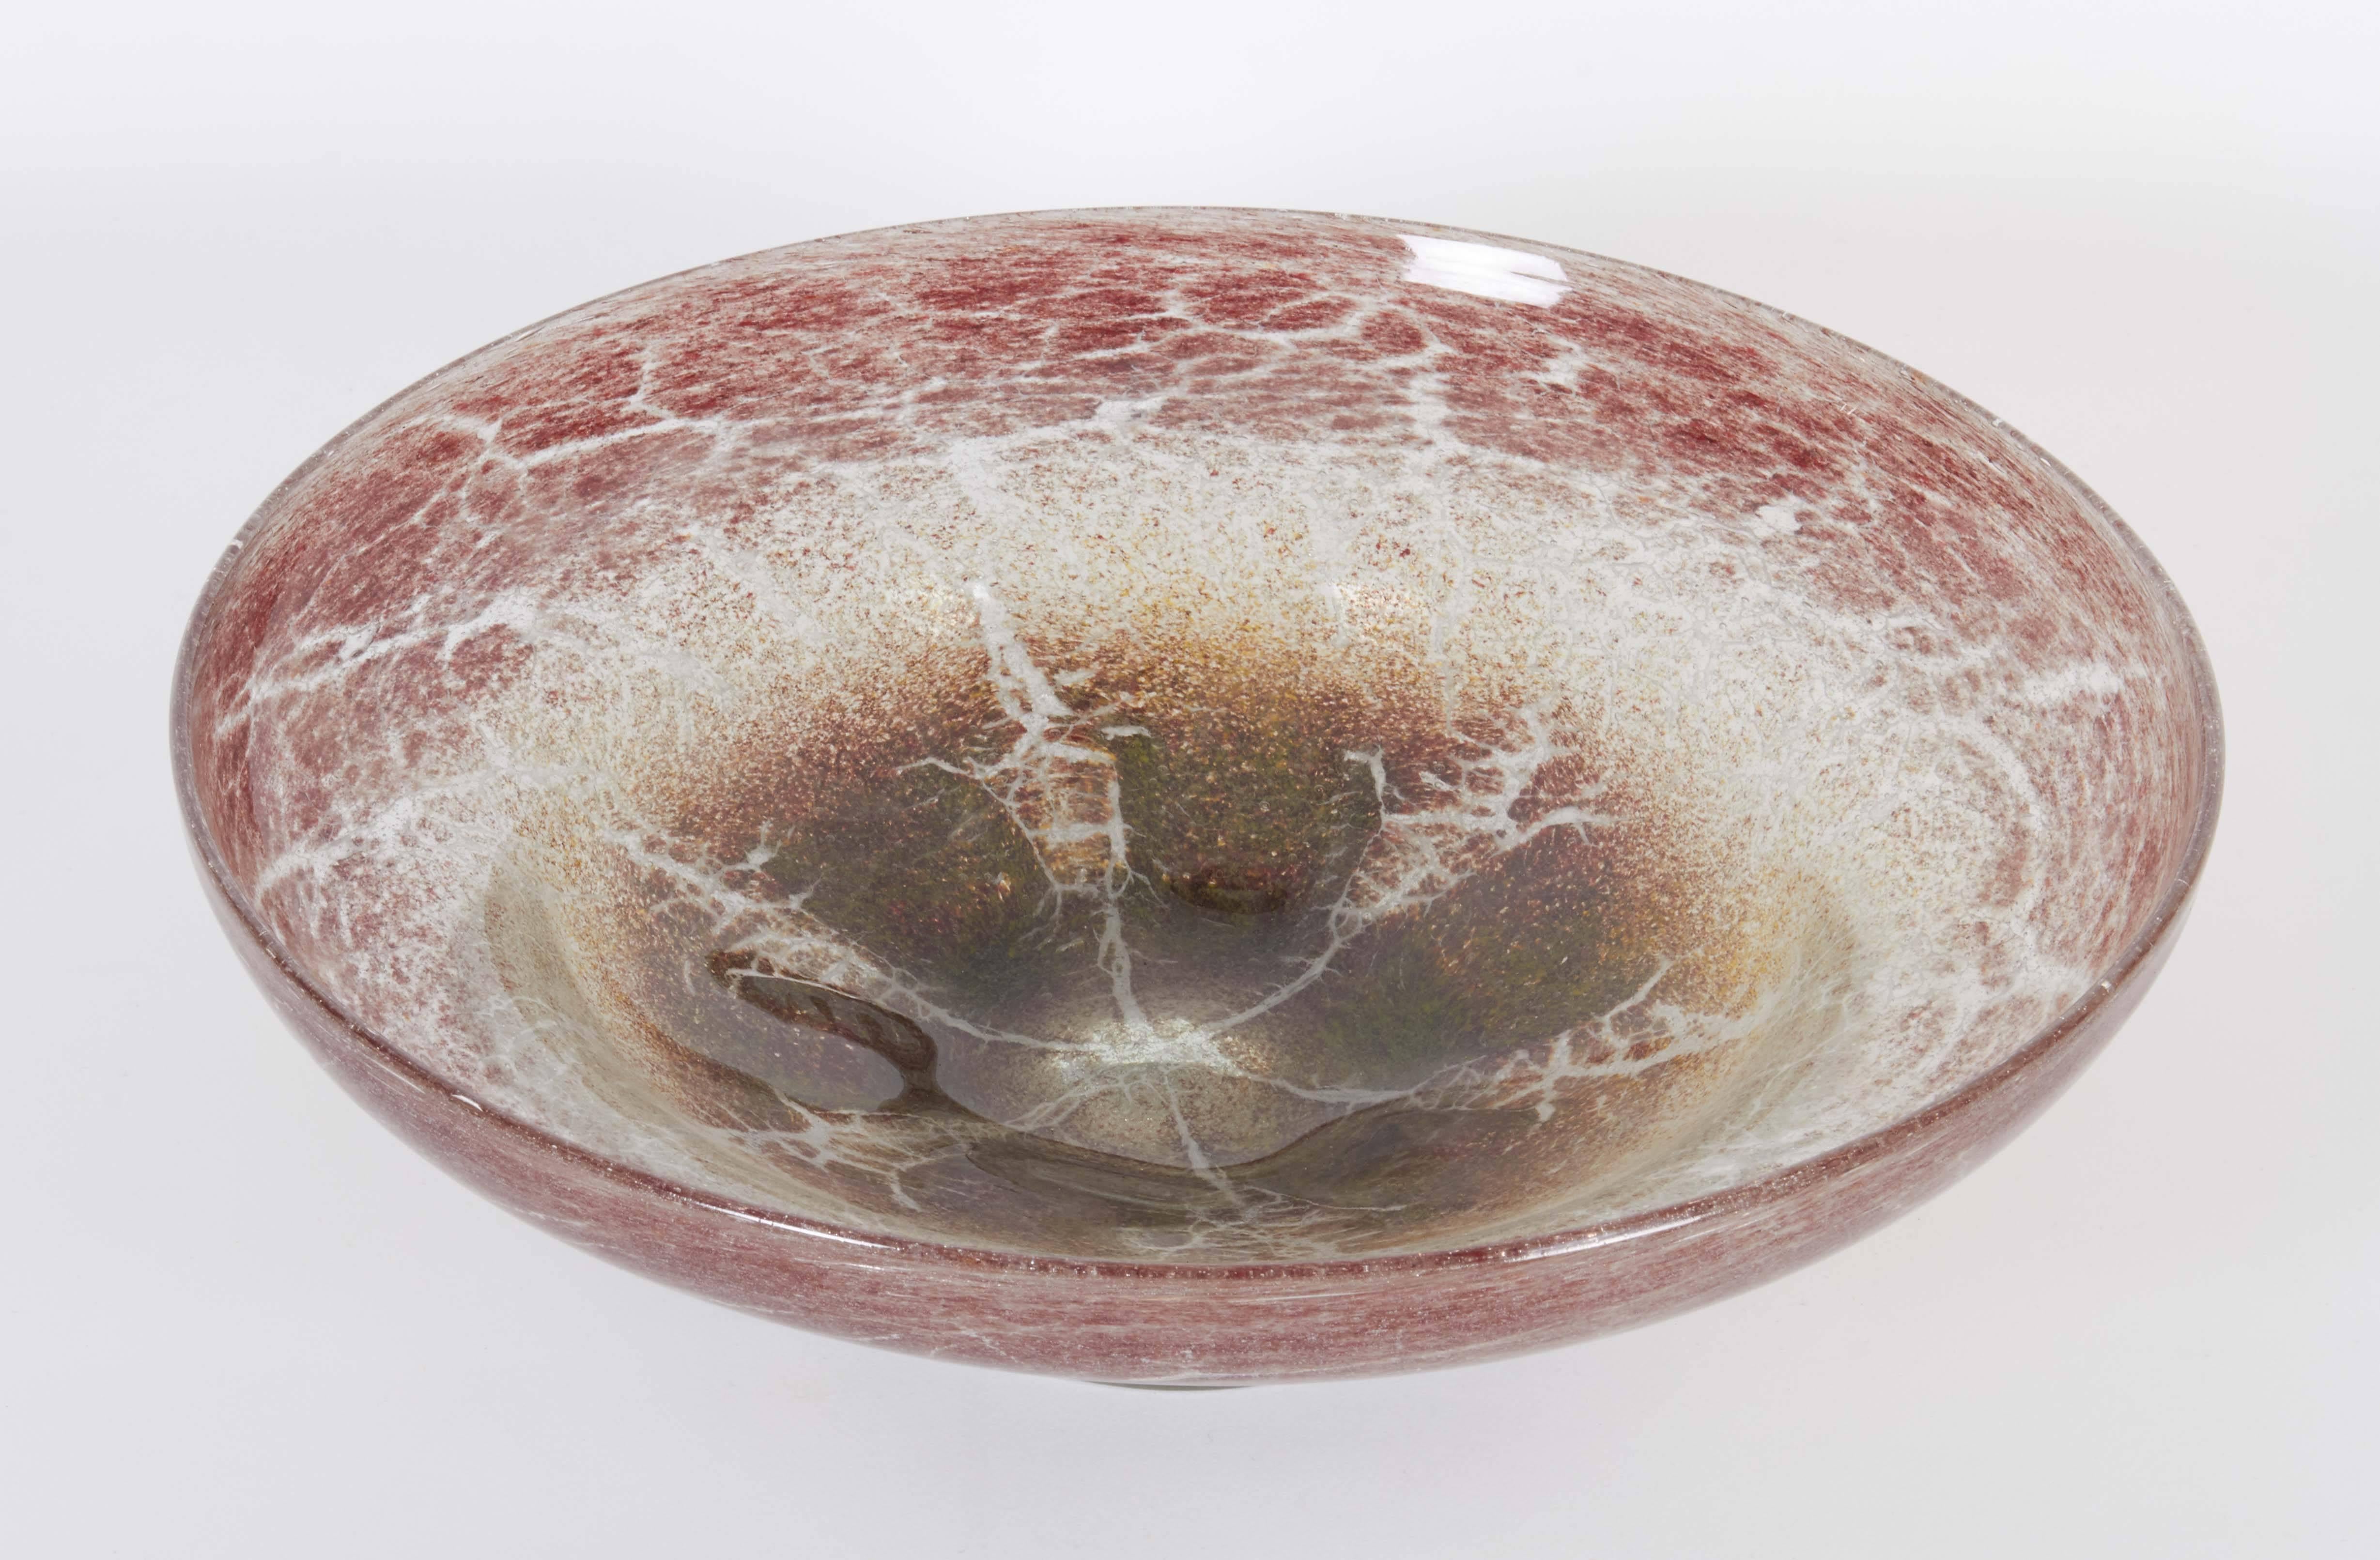 A large decorative 'Ikora' glass bowl, produced, circa 1930s-1950s by WMF (Württembergische Metallwarenfabrik) in Germany, with crackled details in earthy and red tones, raised on a single foot. Very good vintage condition, consistent with age and